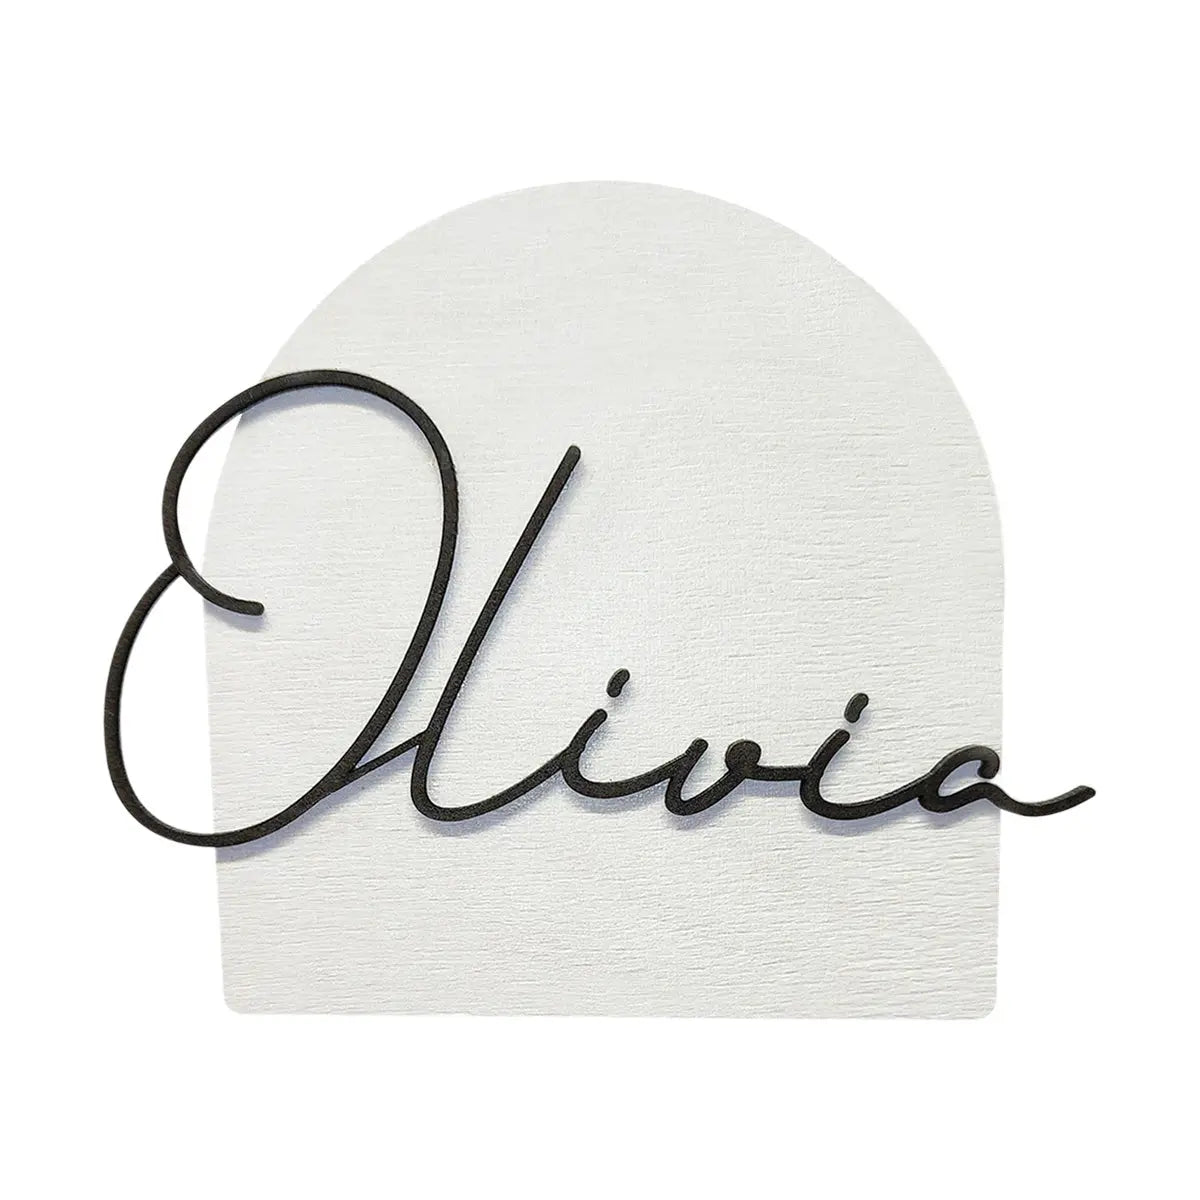 Vintage style white-oval name sign